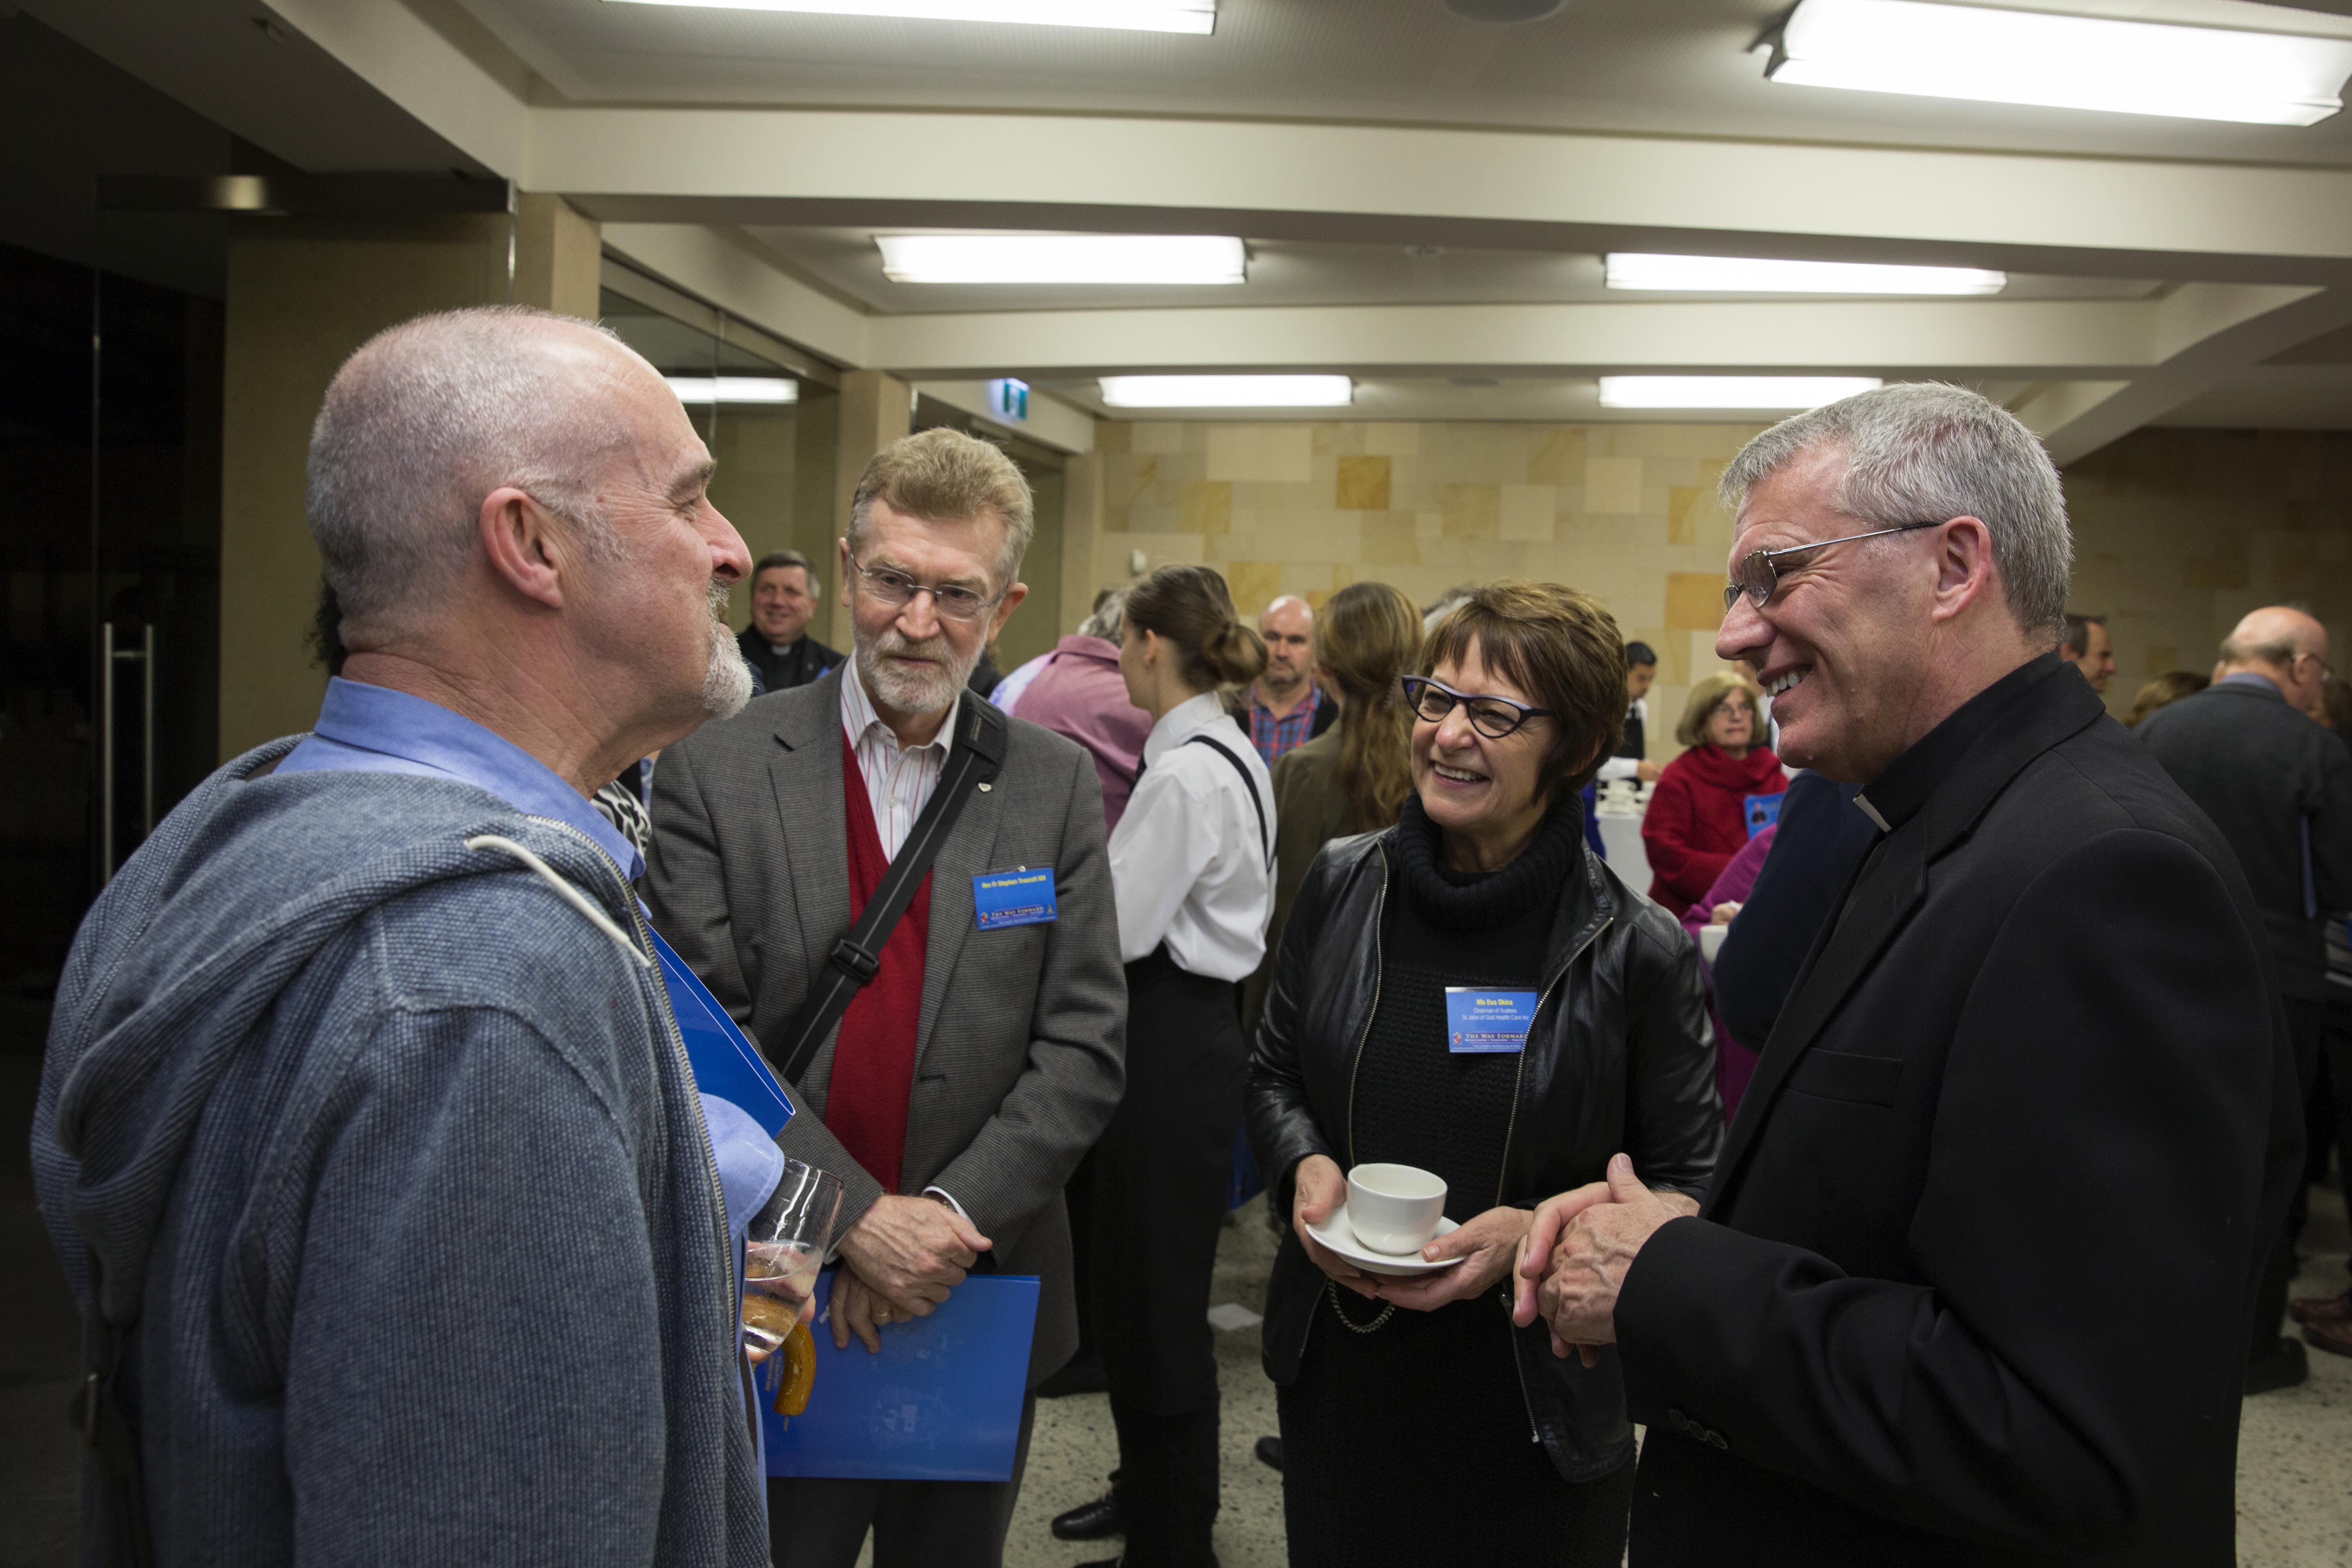 Archbishop Timothy Costelloe speaking to guests who attended the launch of The Way Forward, the consultation phase of the Archdiocesan Plan that took place at St Mary’s Cathedral in September 2015. Photo: Ron Tan.